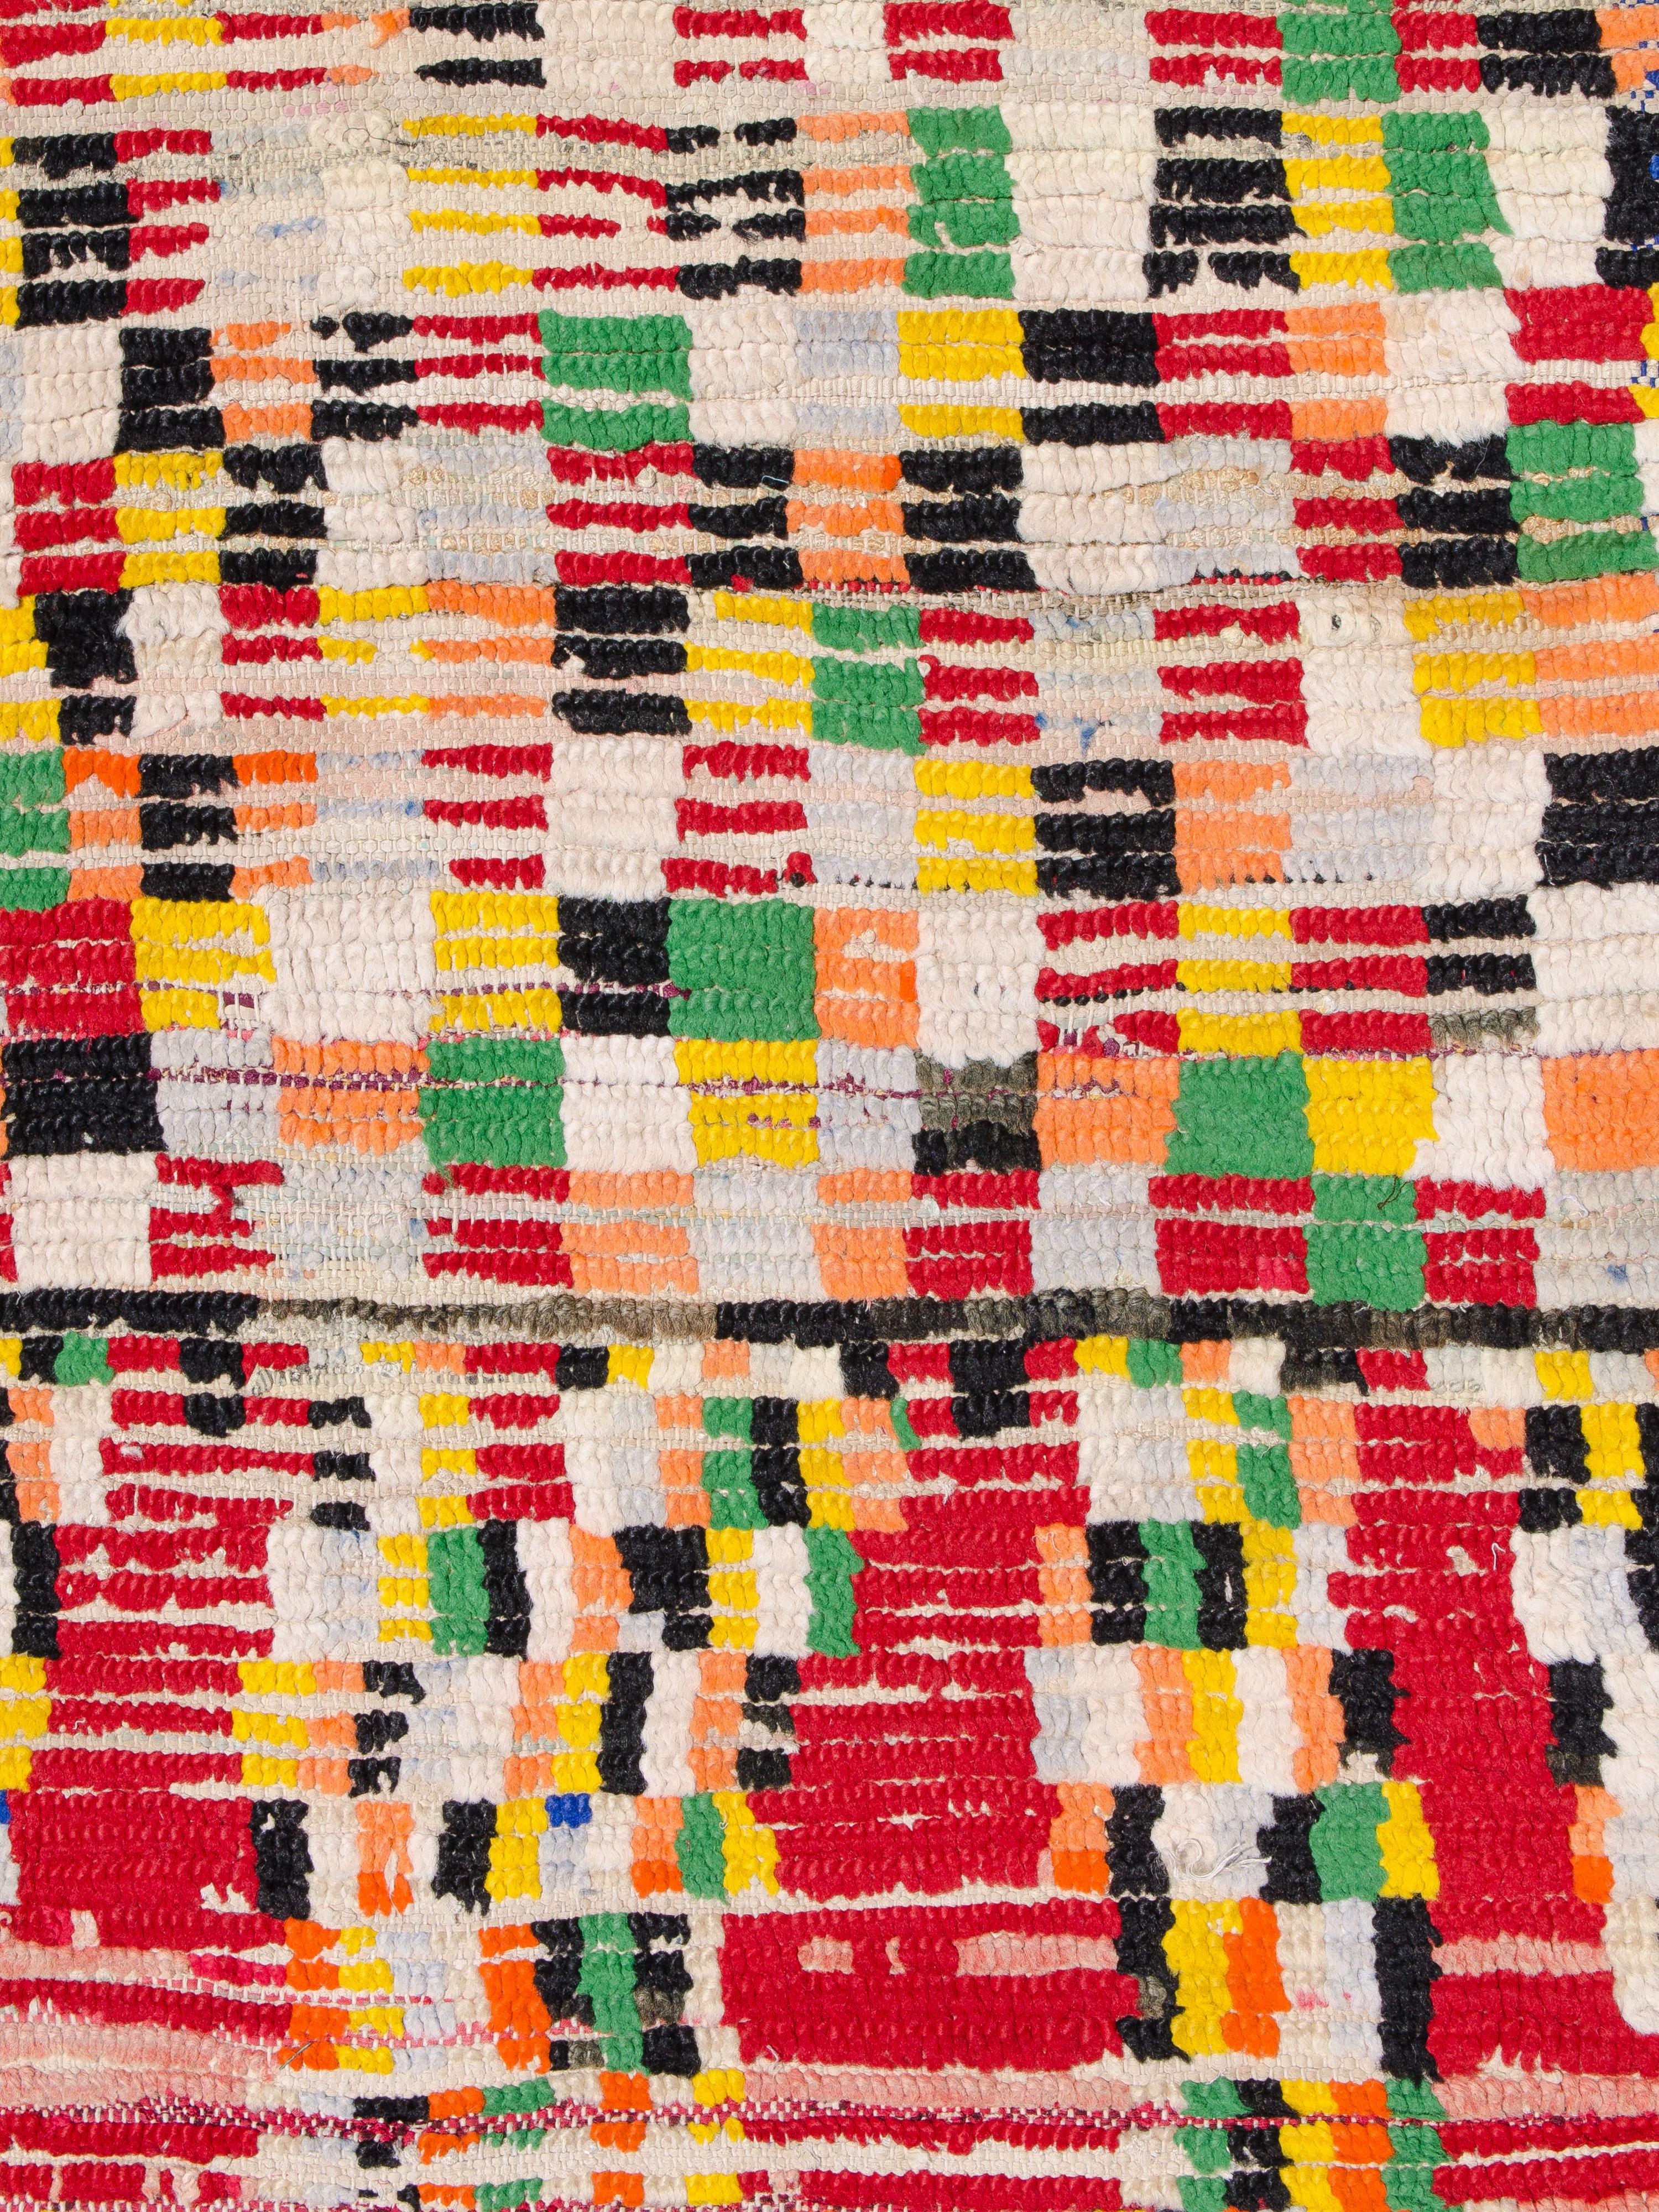 A vibrant study in geometry, composition, and color, this vintage Boujad runner features a checkerboard structure that shifts in scale across the field. An organized grid morphs into various iterations, dissolving at one end. Knotted in a playful